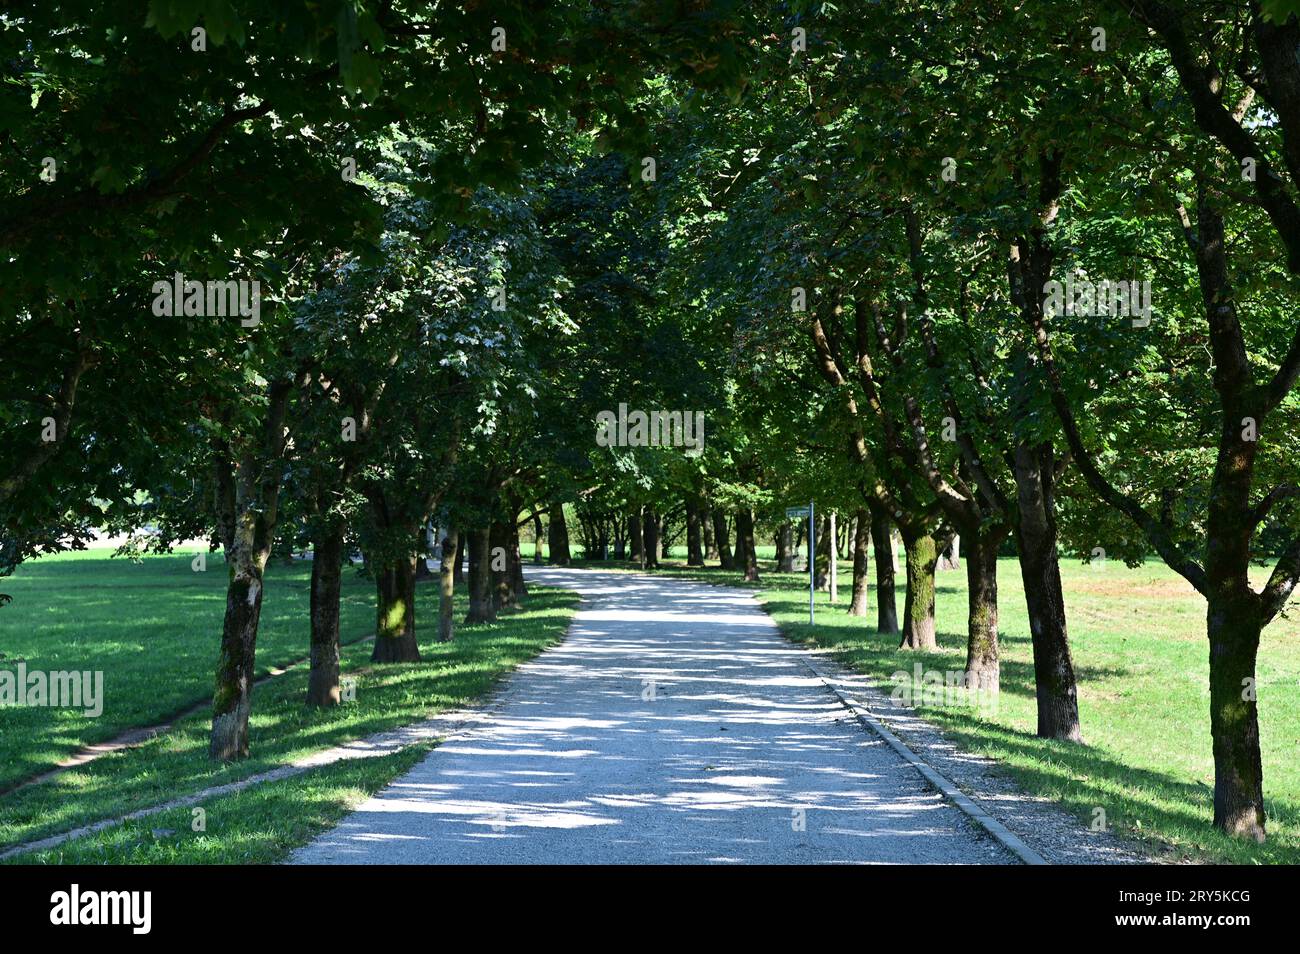 A walkway lined with trees on both sides Stock Photo